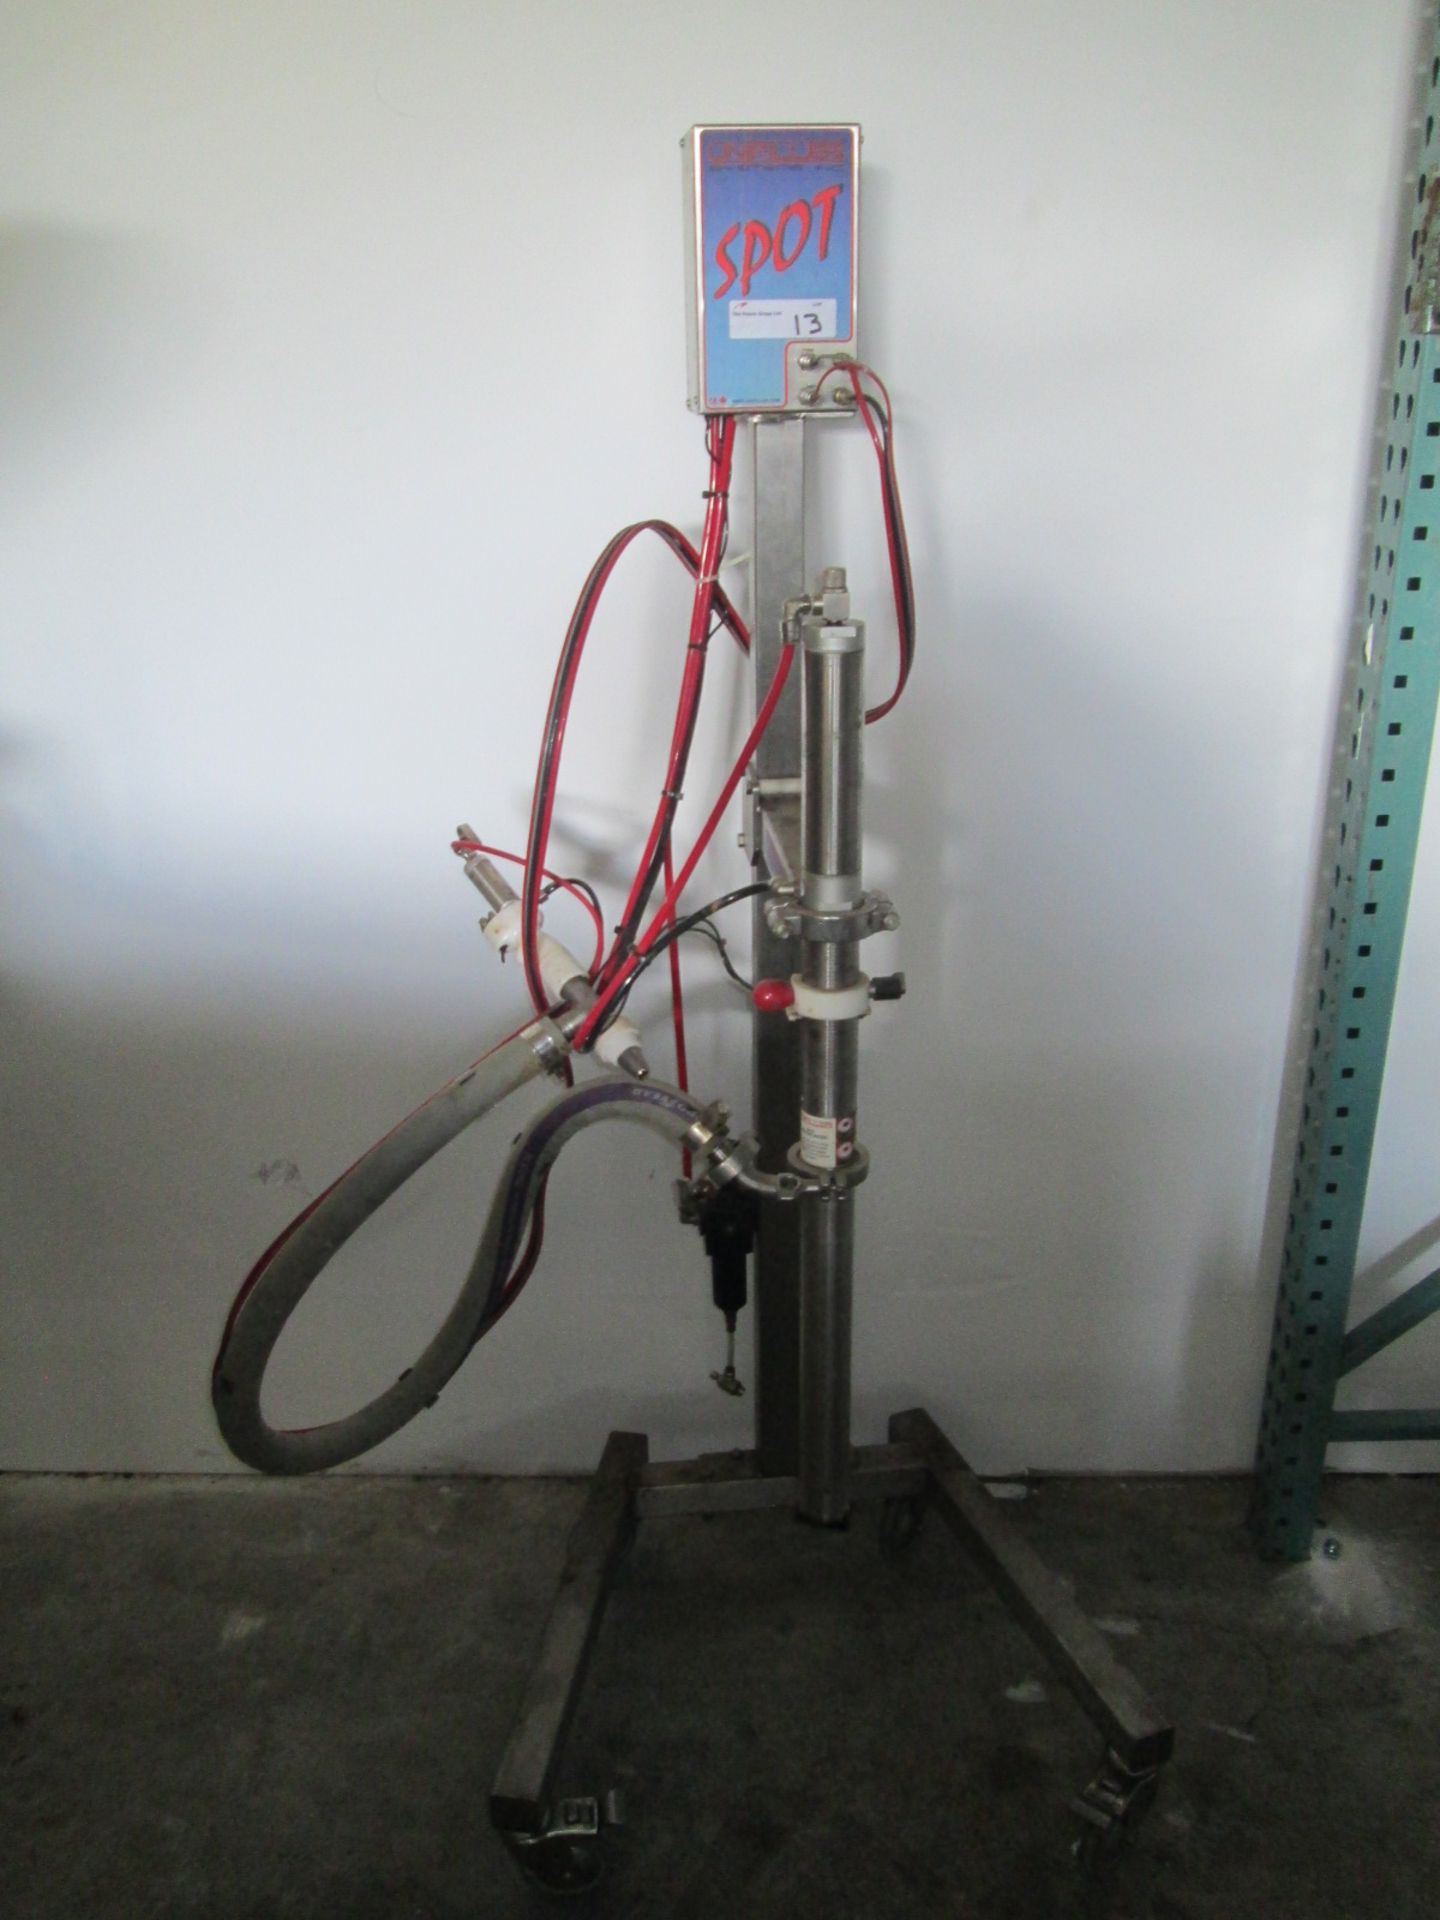 Unifiller Systems Inc, Stainless Steel Single Nozzle "SPOT" Filler. Stainless Steel Construction,